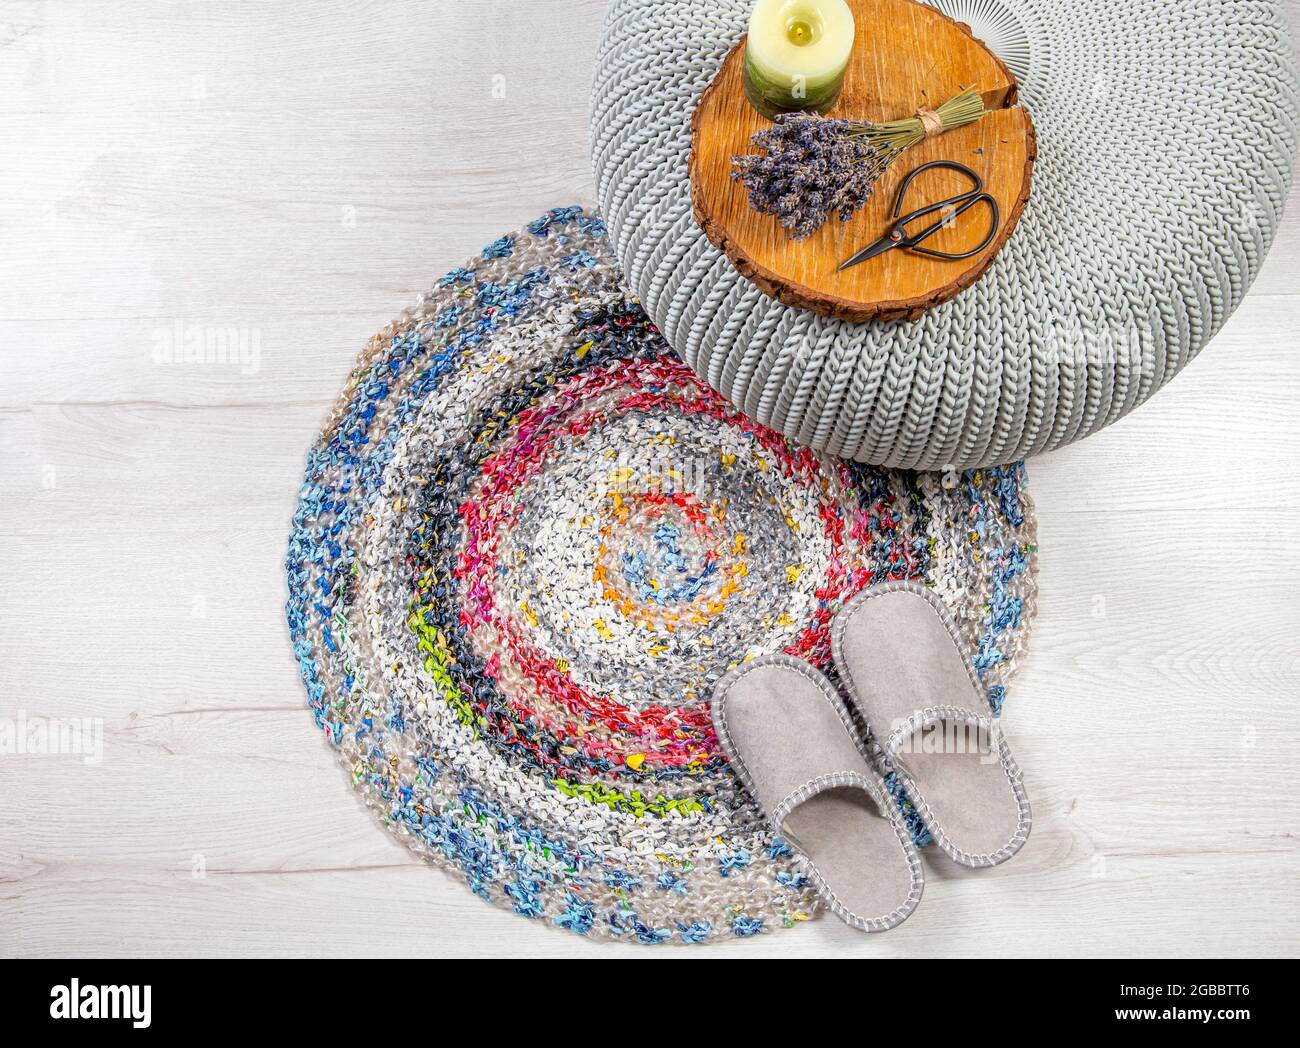 https://c8.alamy.com/comp/2GBBTT6/homemade-waterproof-crochet-rug-made-from-used-plastic-bags-rag-rug-upcycling-and-recycling-concept-made-of-plastic-yarn-or-plarn-2GBBTT6.jpg